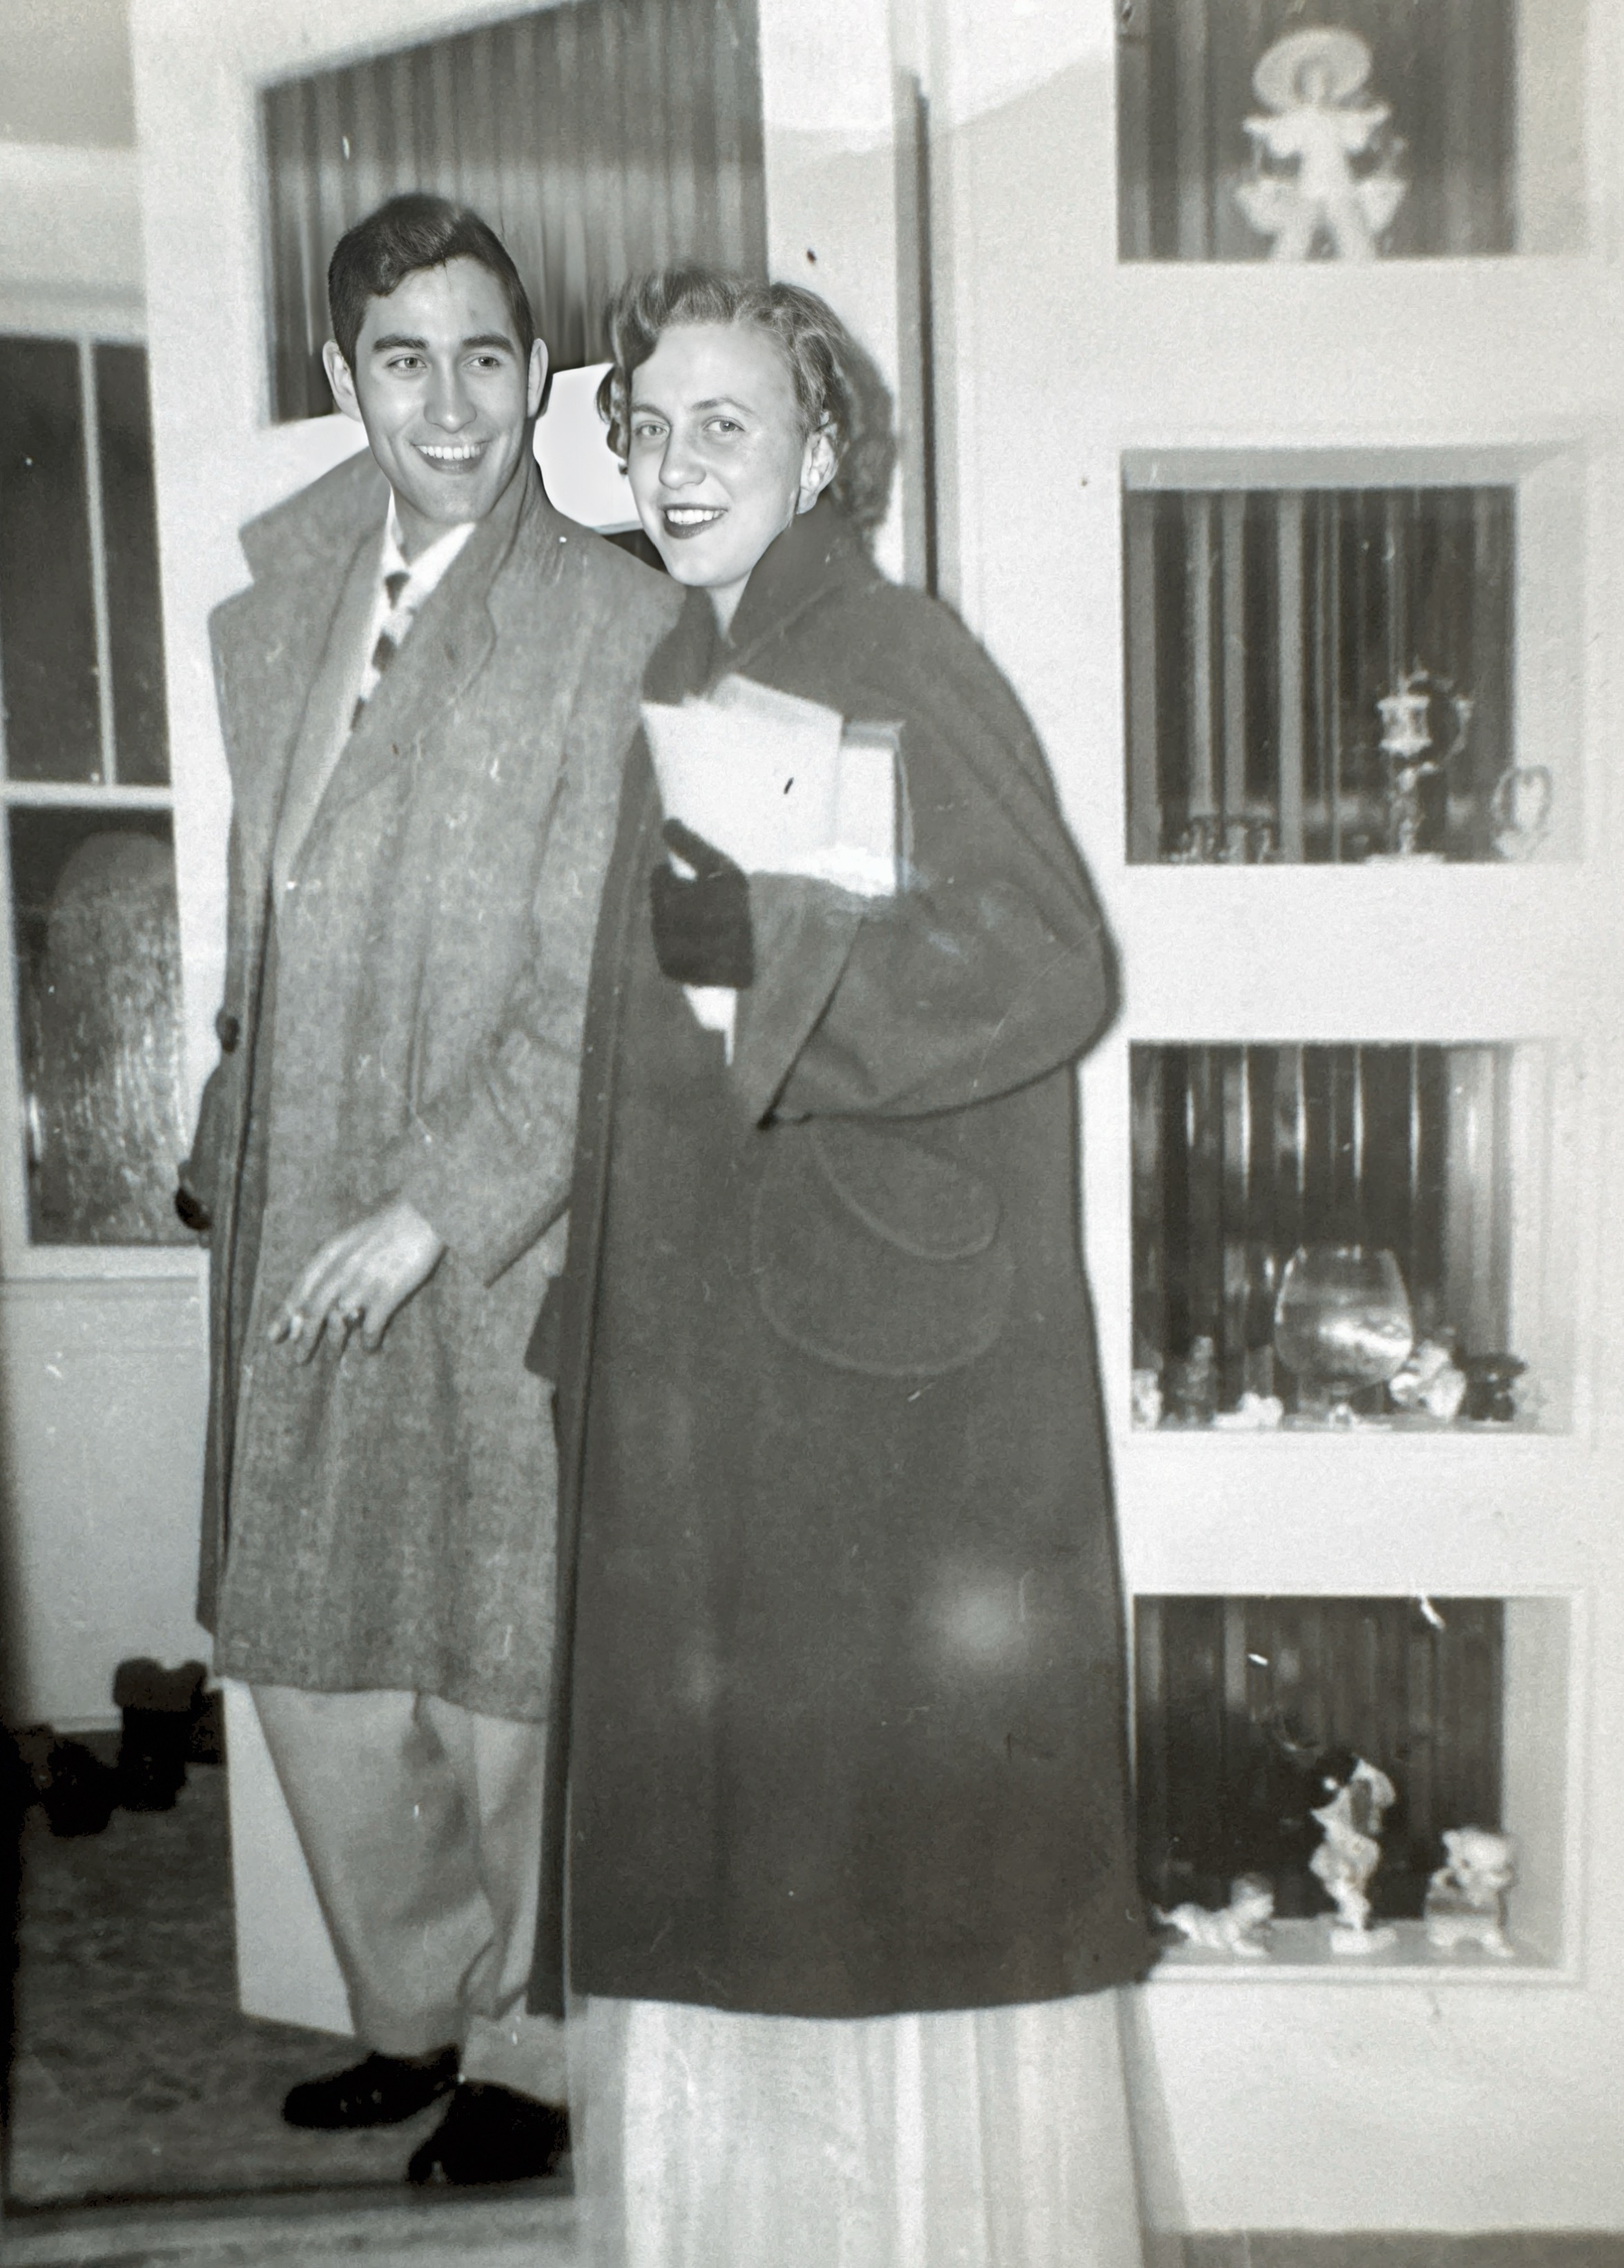 Mom, Naudean Maas, is going to a formal dance with Paul Rozowski.  Paul is Patti Rozowski’s dad. 1948 I think. Because Paul did not dance, and dance was mom‘s passion, they ended up breaking up. Mom danced the fast songs much of her time with Marsh Liebert. She said she had seven boyfriends that broke up with her because she loved to dance so much and they didn’t😉